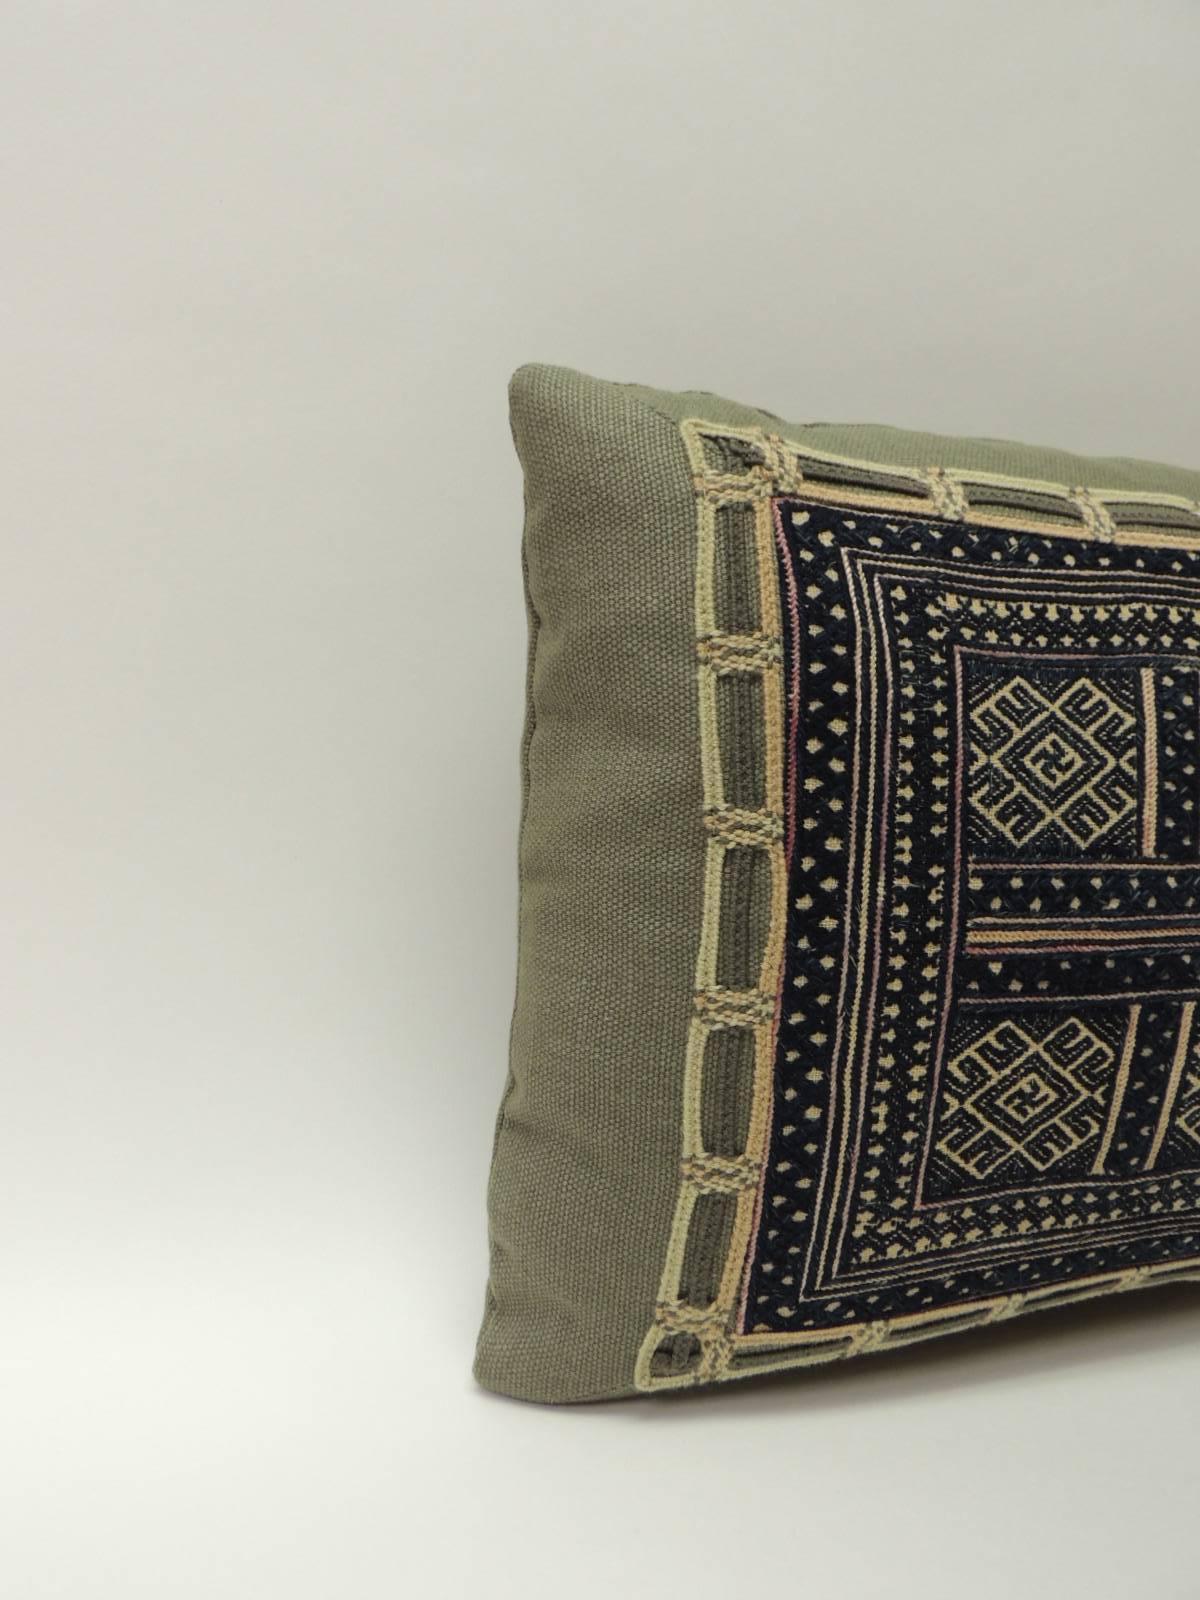 This item is part of our 7Th Anniversary SALE:
Centre multi-color woven panel embellished with a framed moss green linen, 
same linen textile used as backing. Throw bolster pillow decorated with a 
small woven cotton trim applied all around.